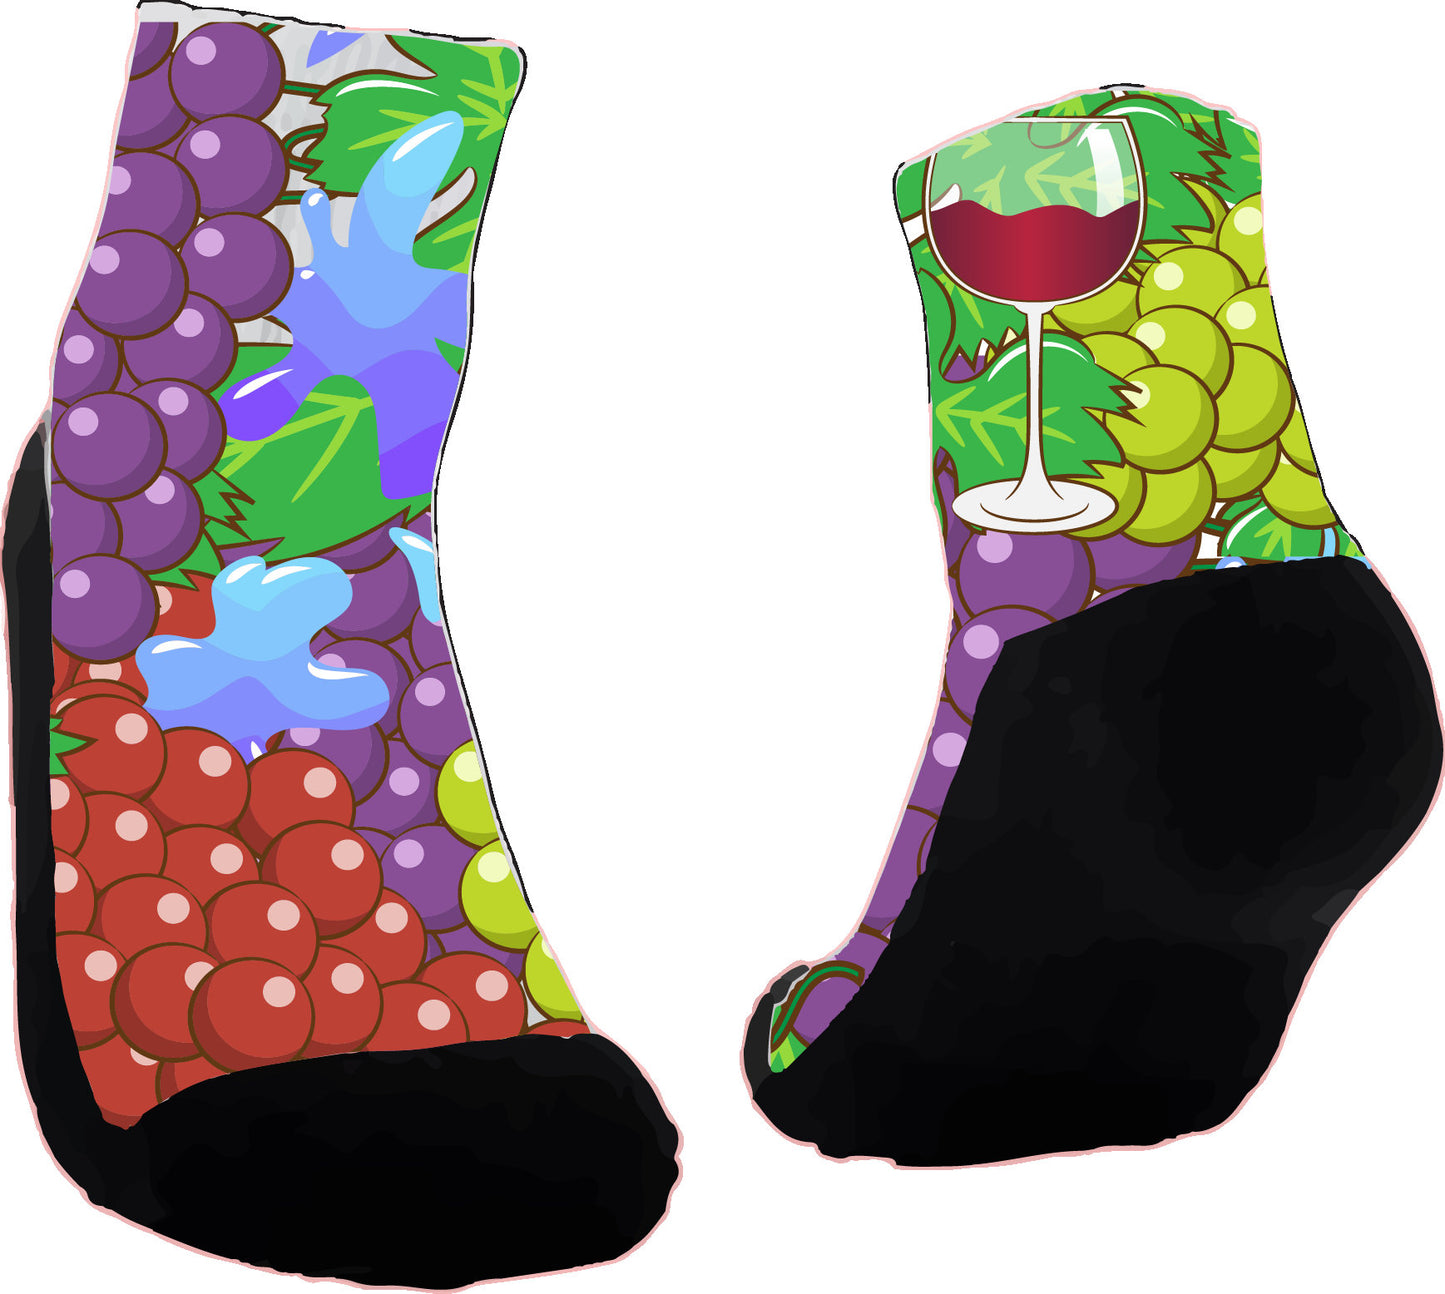 Wine Now Custom Socks, Can be personalized and created for you, customized socks perfect as a holiday gift or birthday gift. Athletic Crew